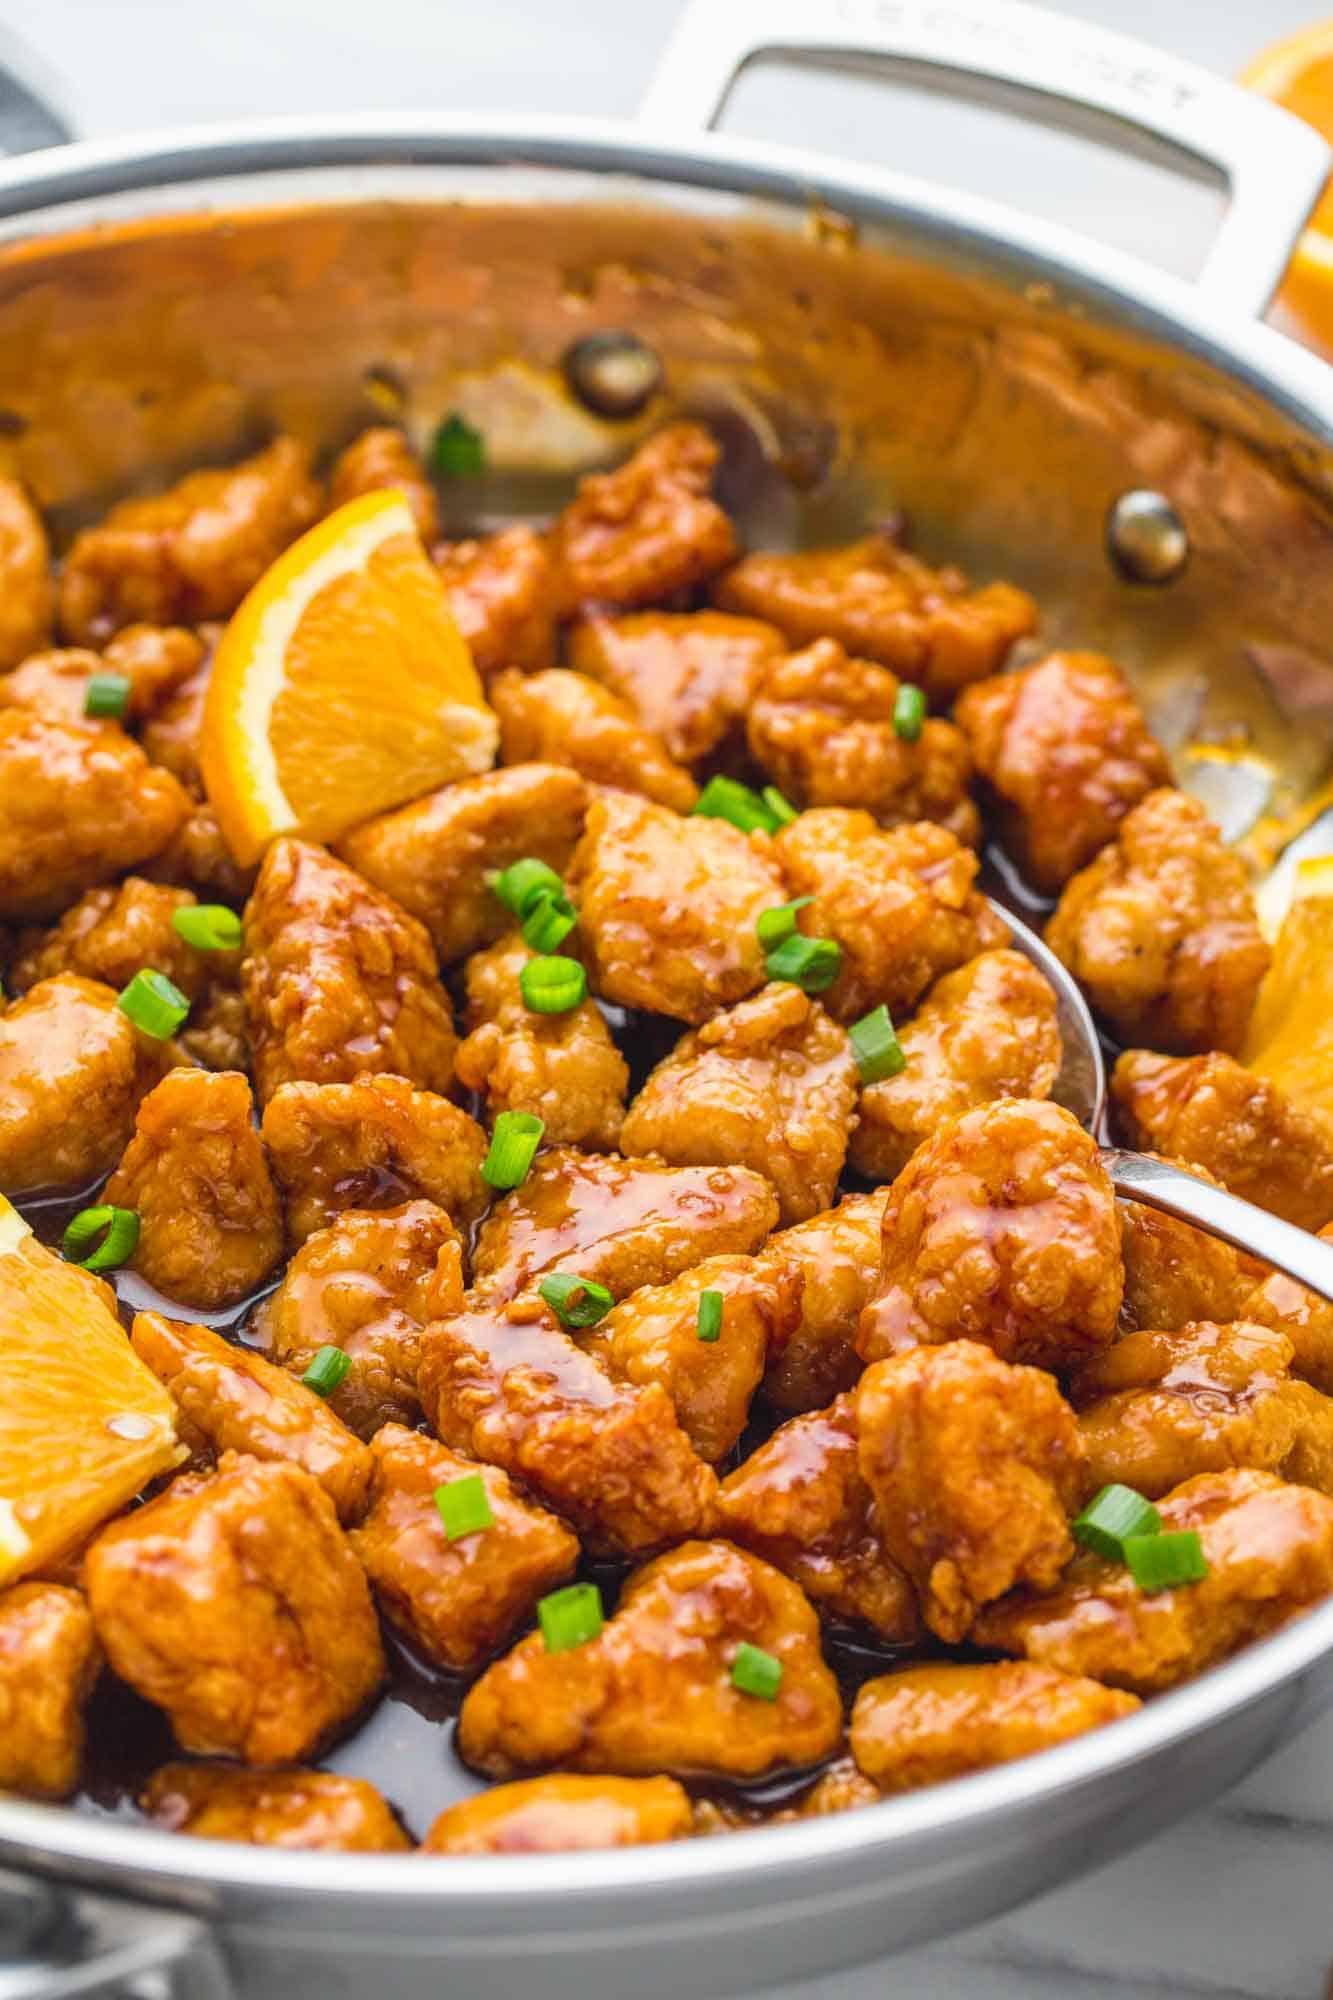 Image with an angle of orange chicken in a skillet